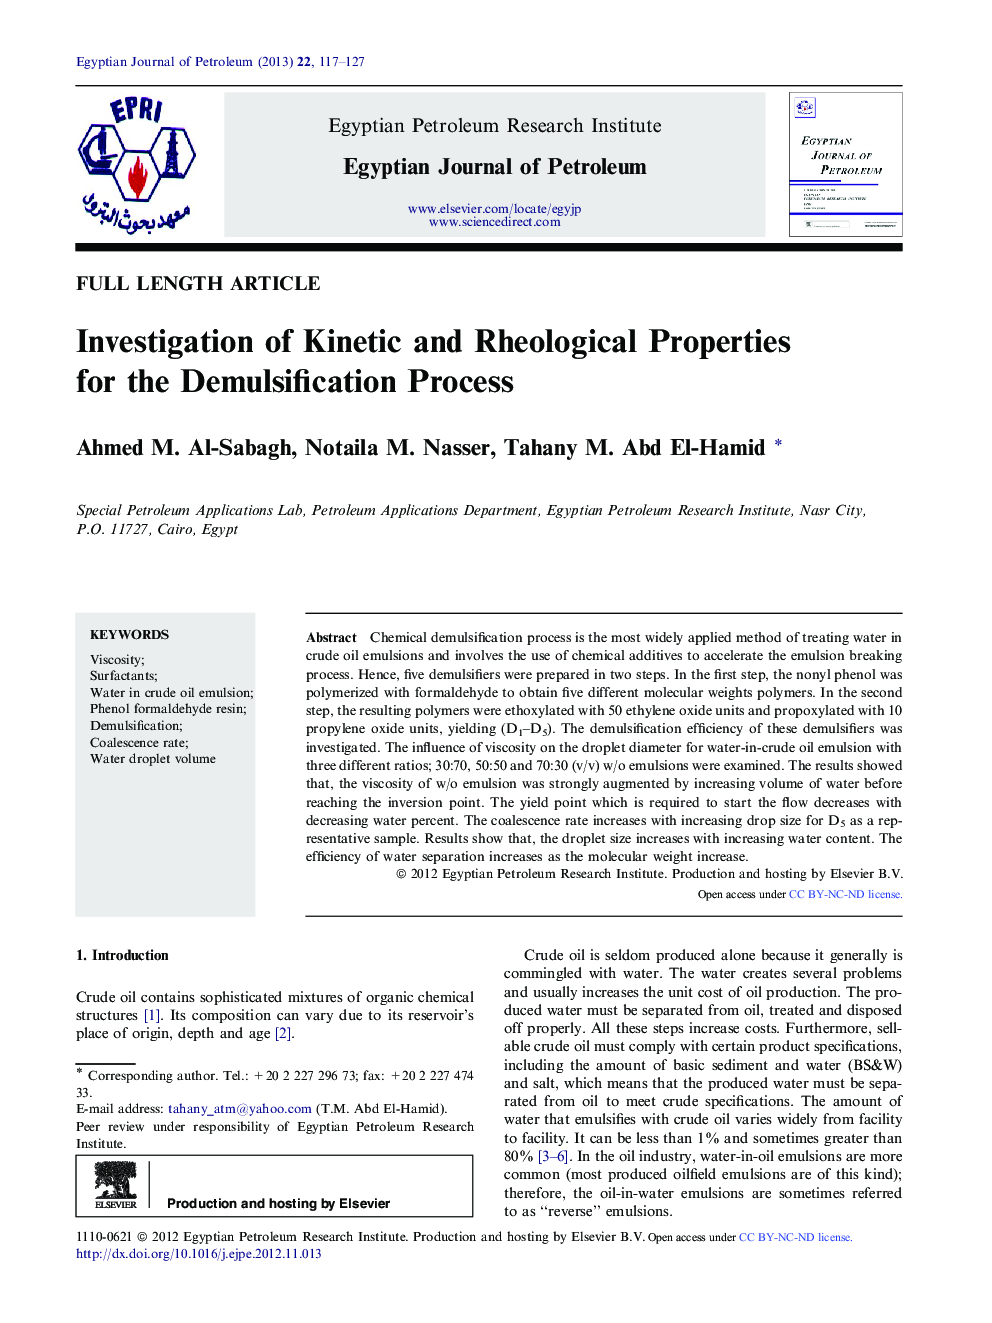 Investigation of Kinetic and Rheological Properties for the Demulsification Process 